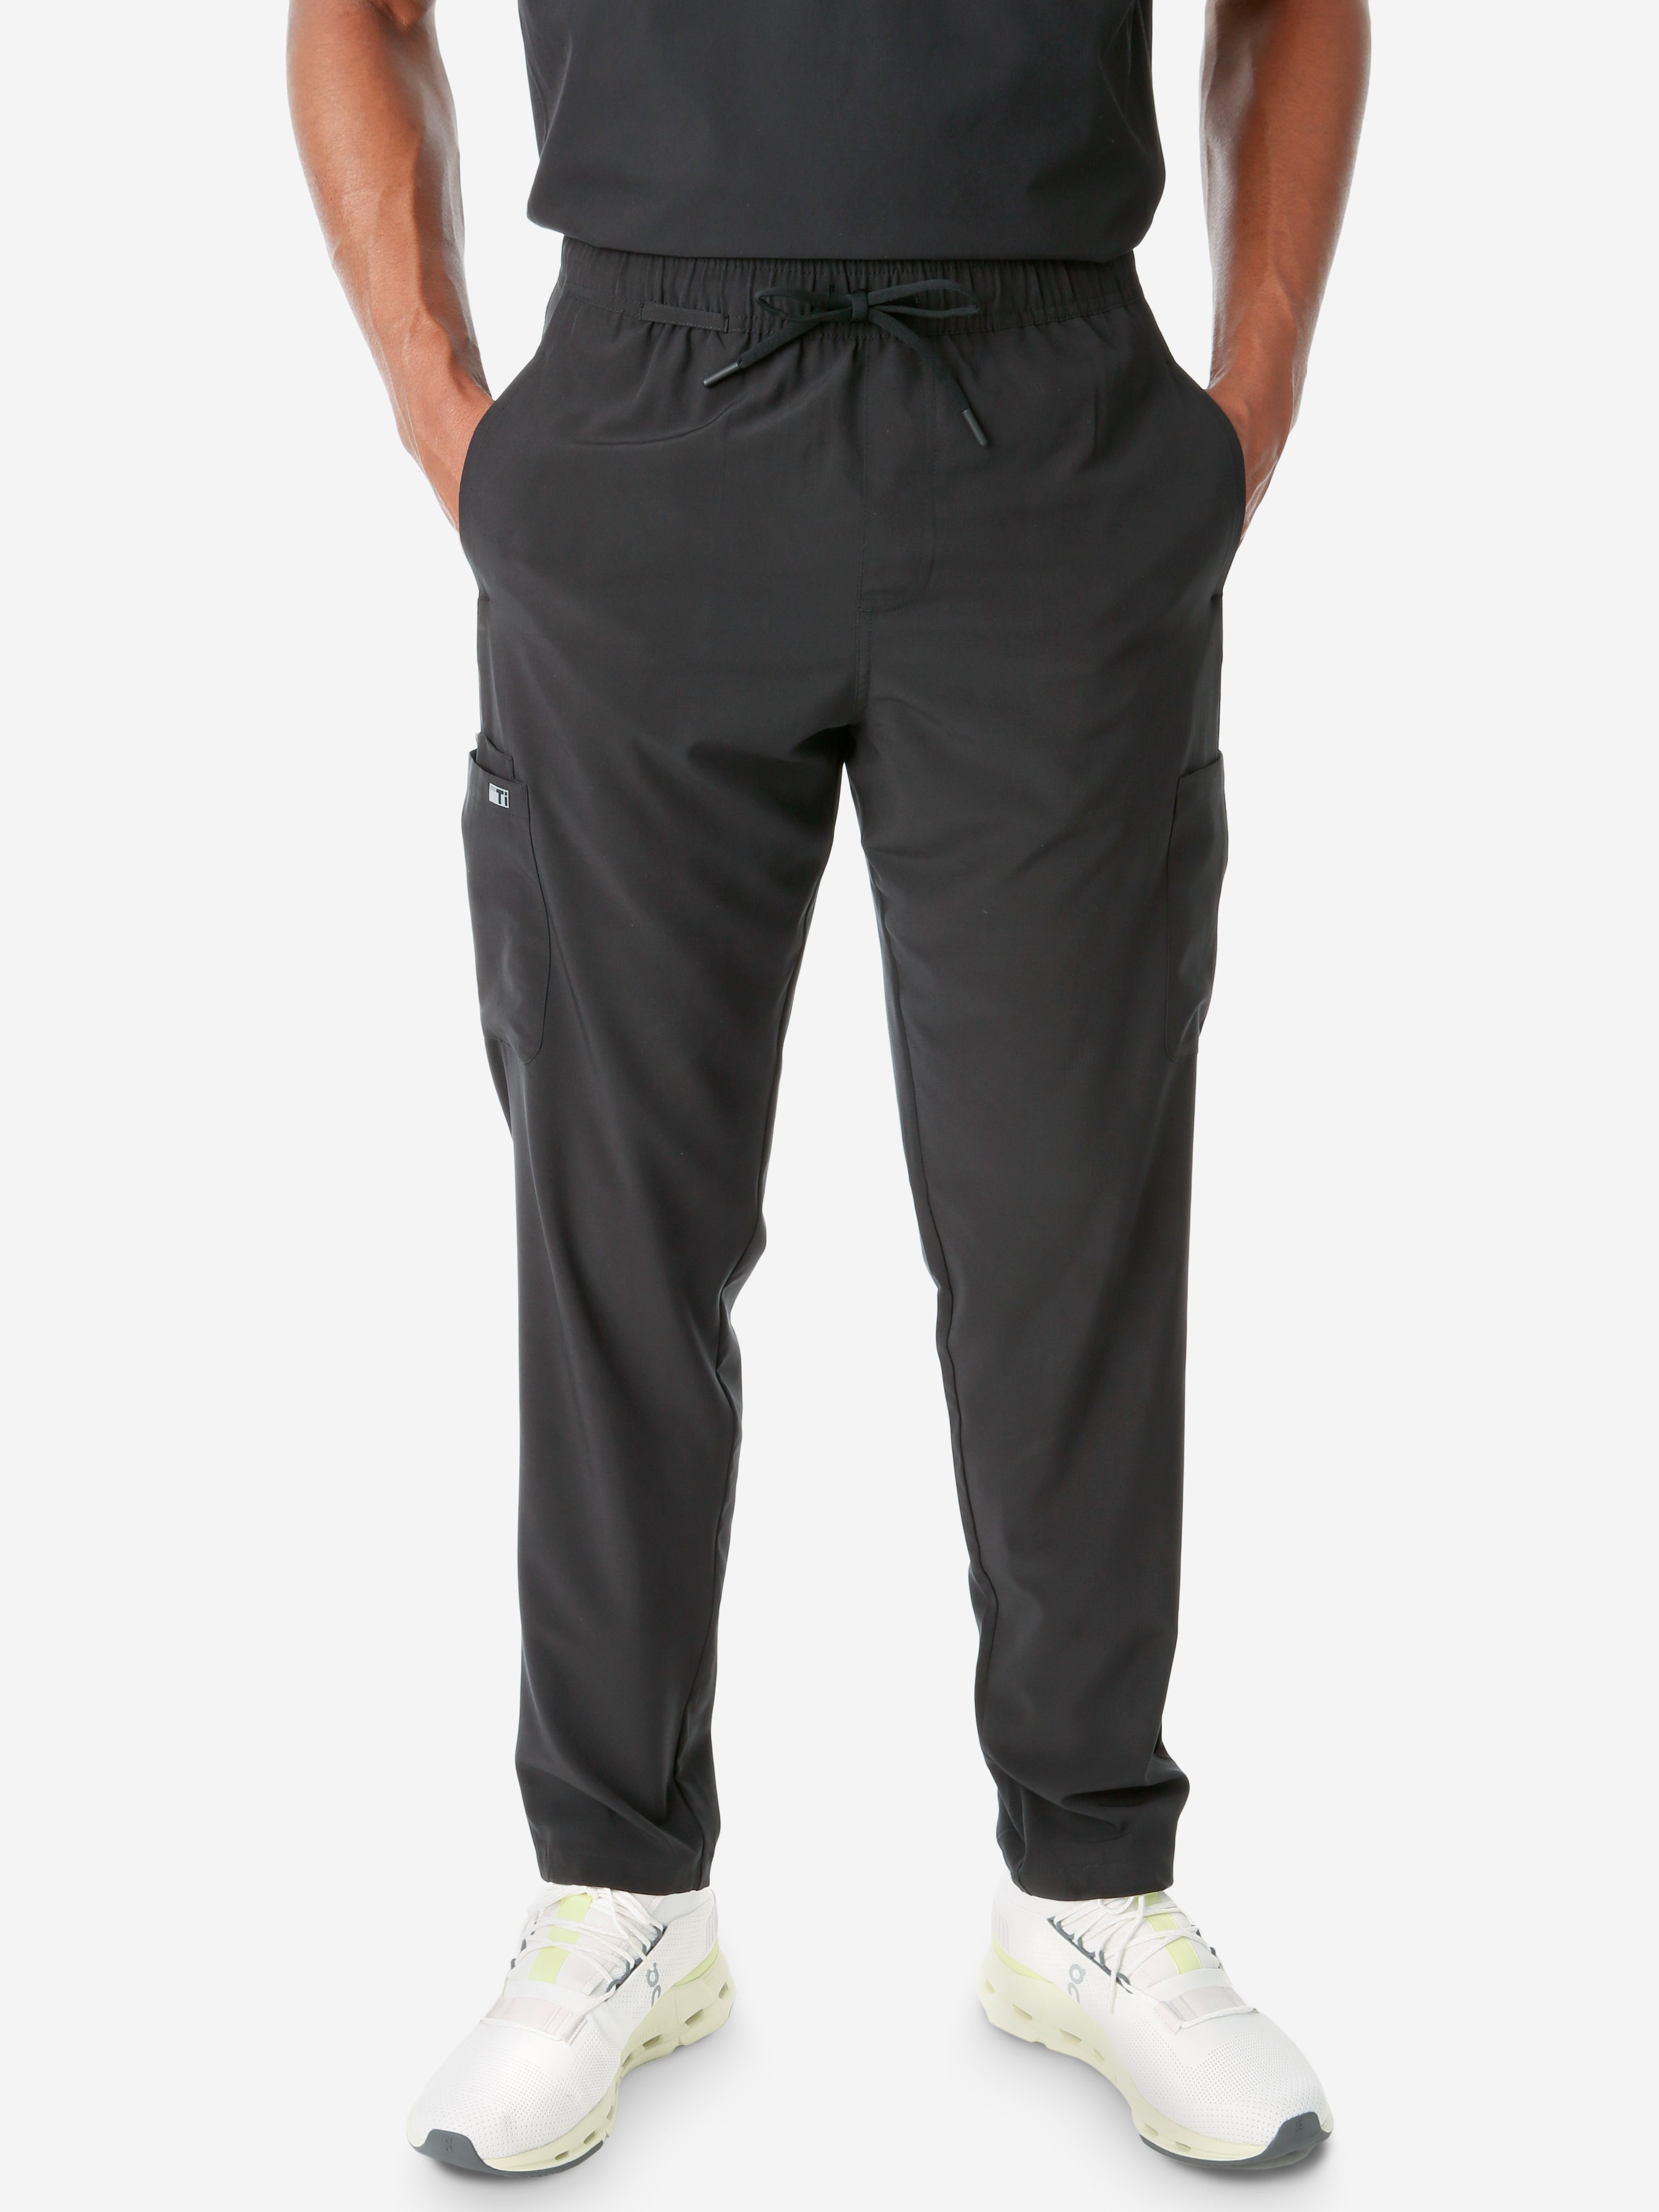 Scrubmates Under Scrub Pants for Men with Hip Pockets